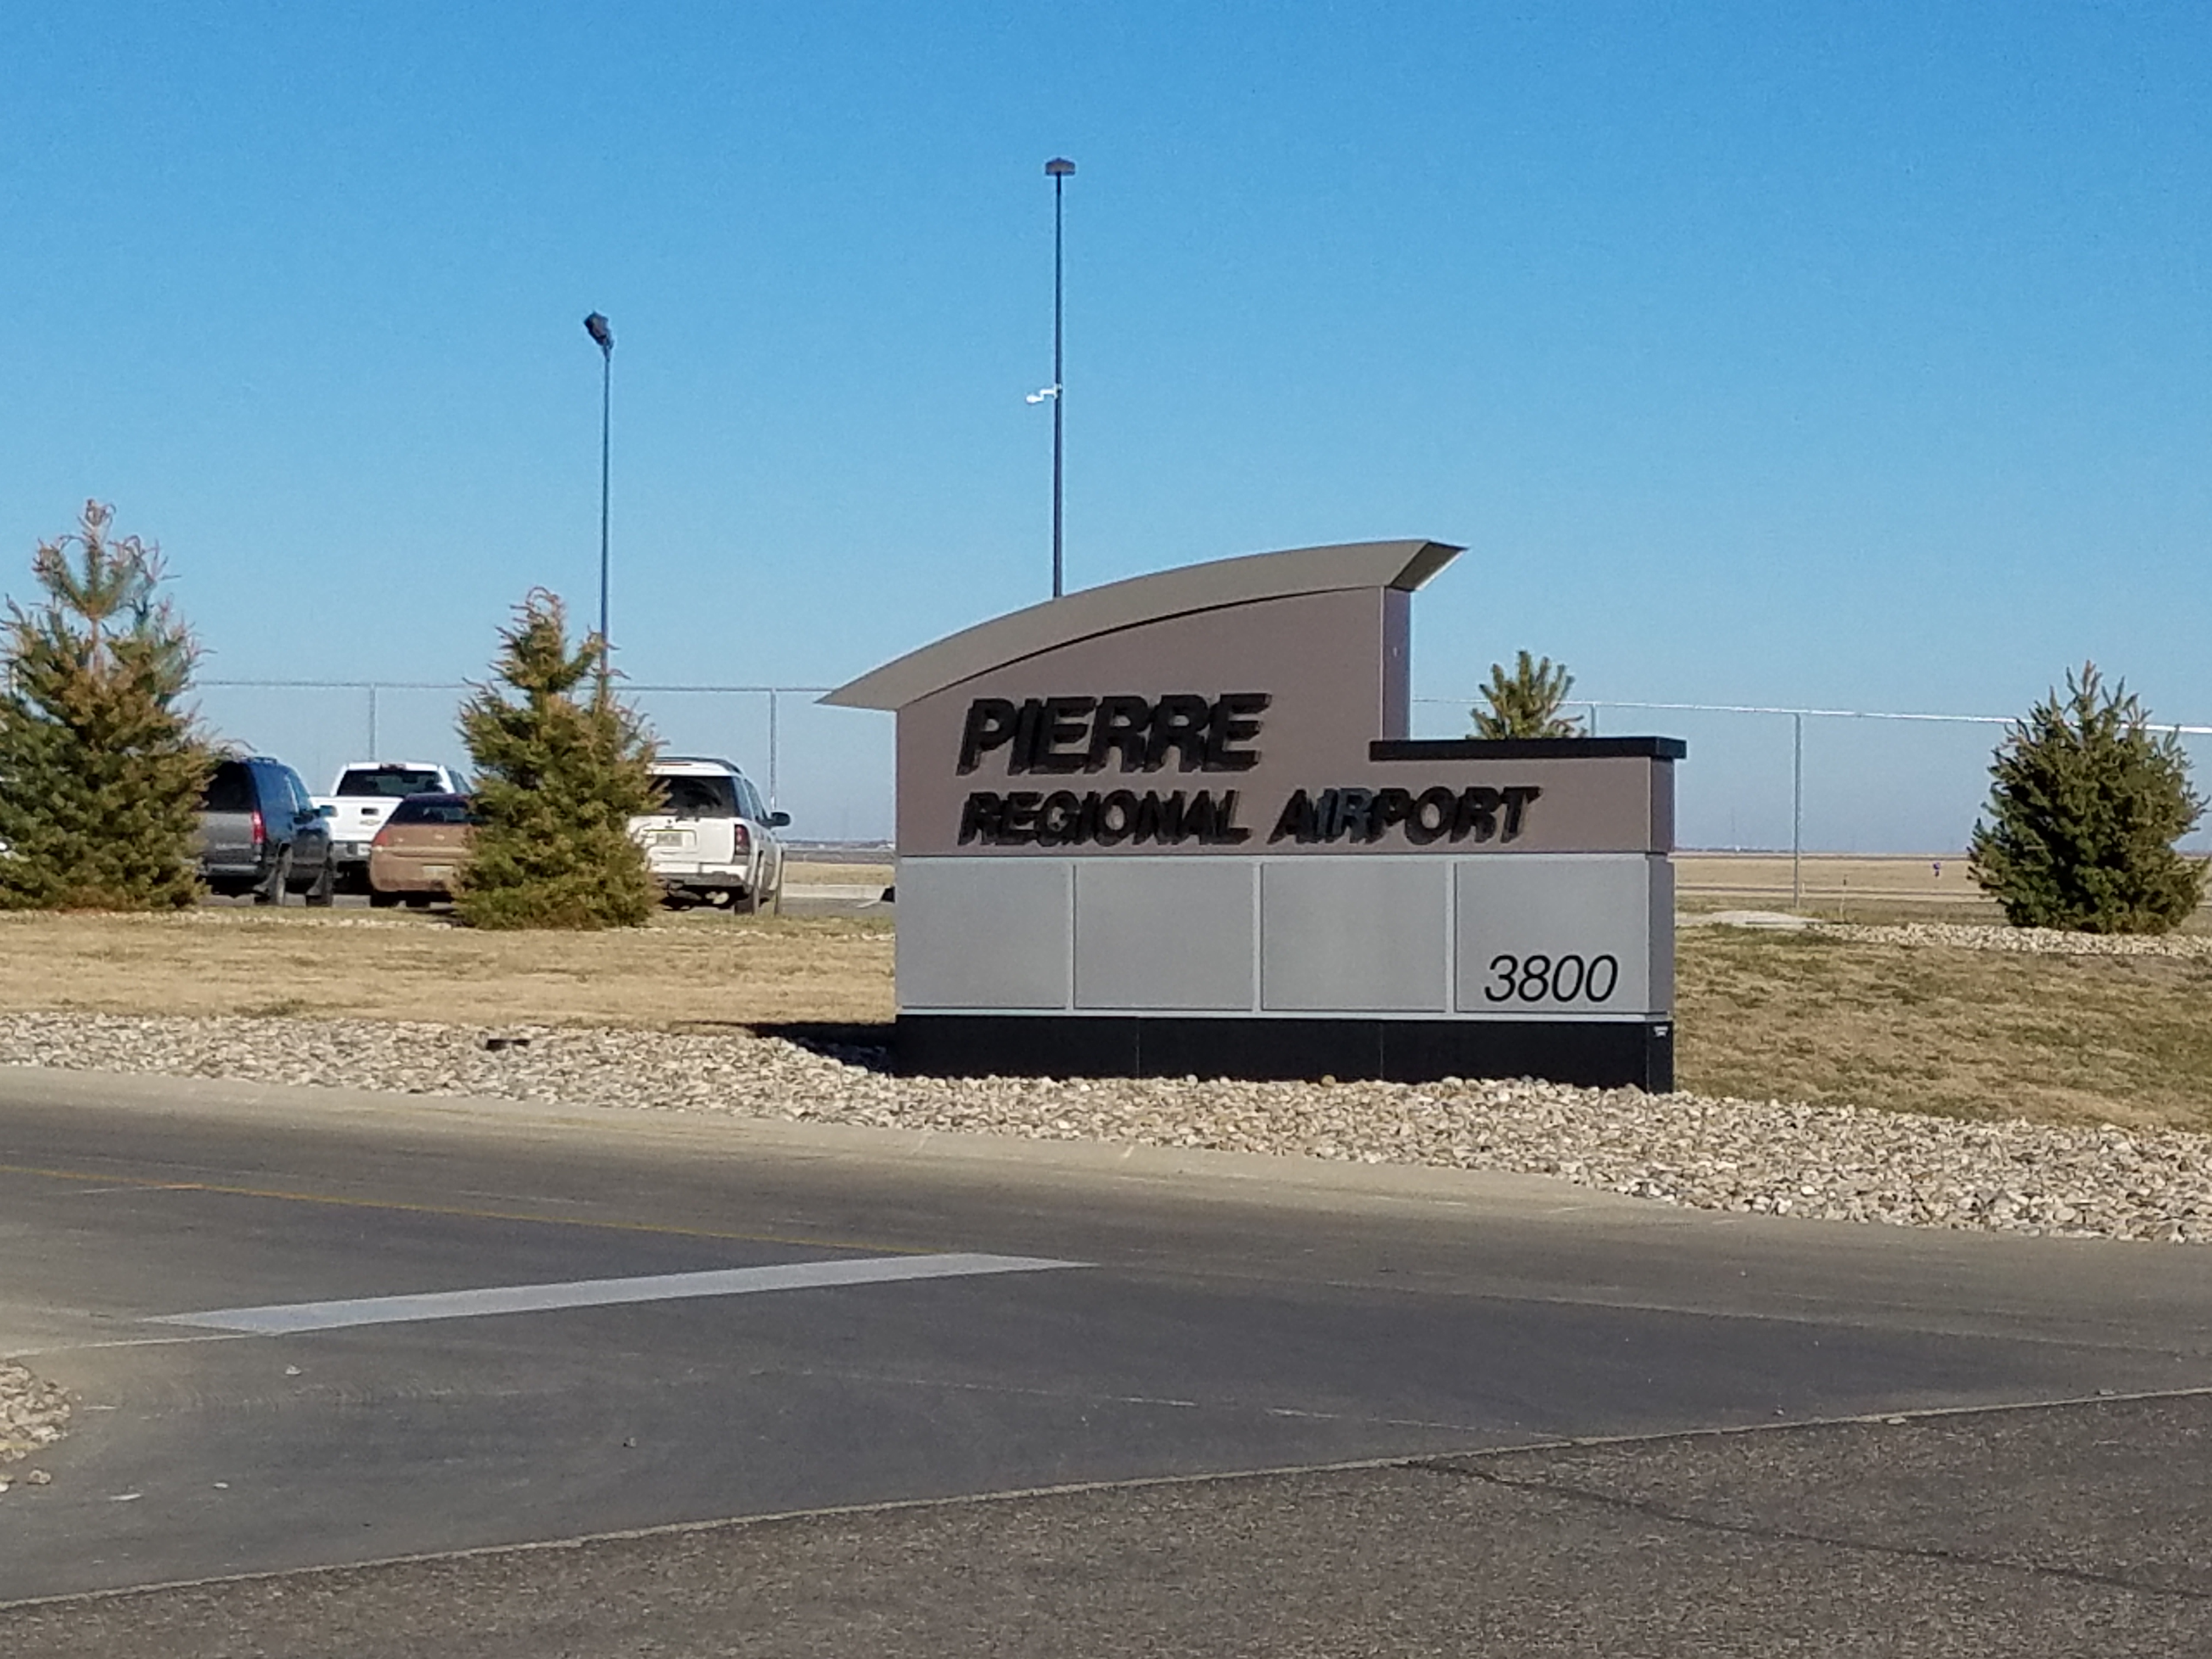 Johnson Amendment To FAA Reauthorization Bill Saves Pierre, Other EAS Airports From Extra Fees For Program Participation